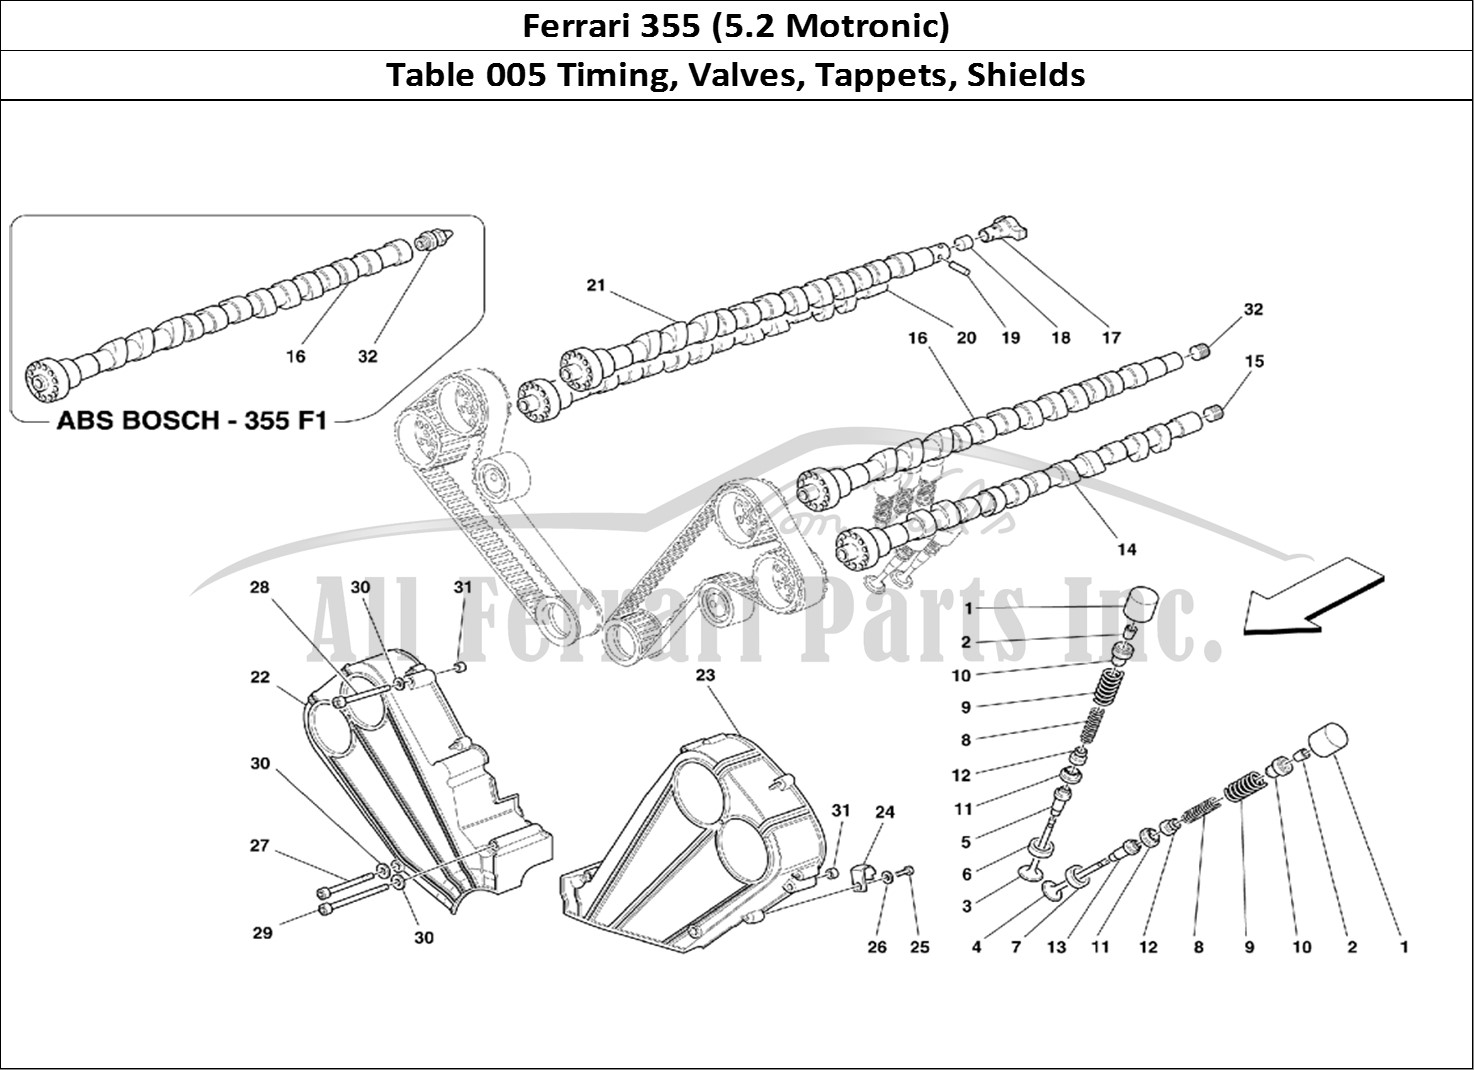 Ferrari Parts Ferrari 355 (5.2 Motronic) Page 005 Timing - Tappets and Shie